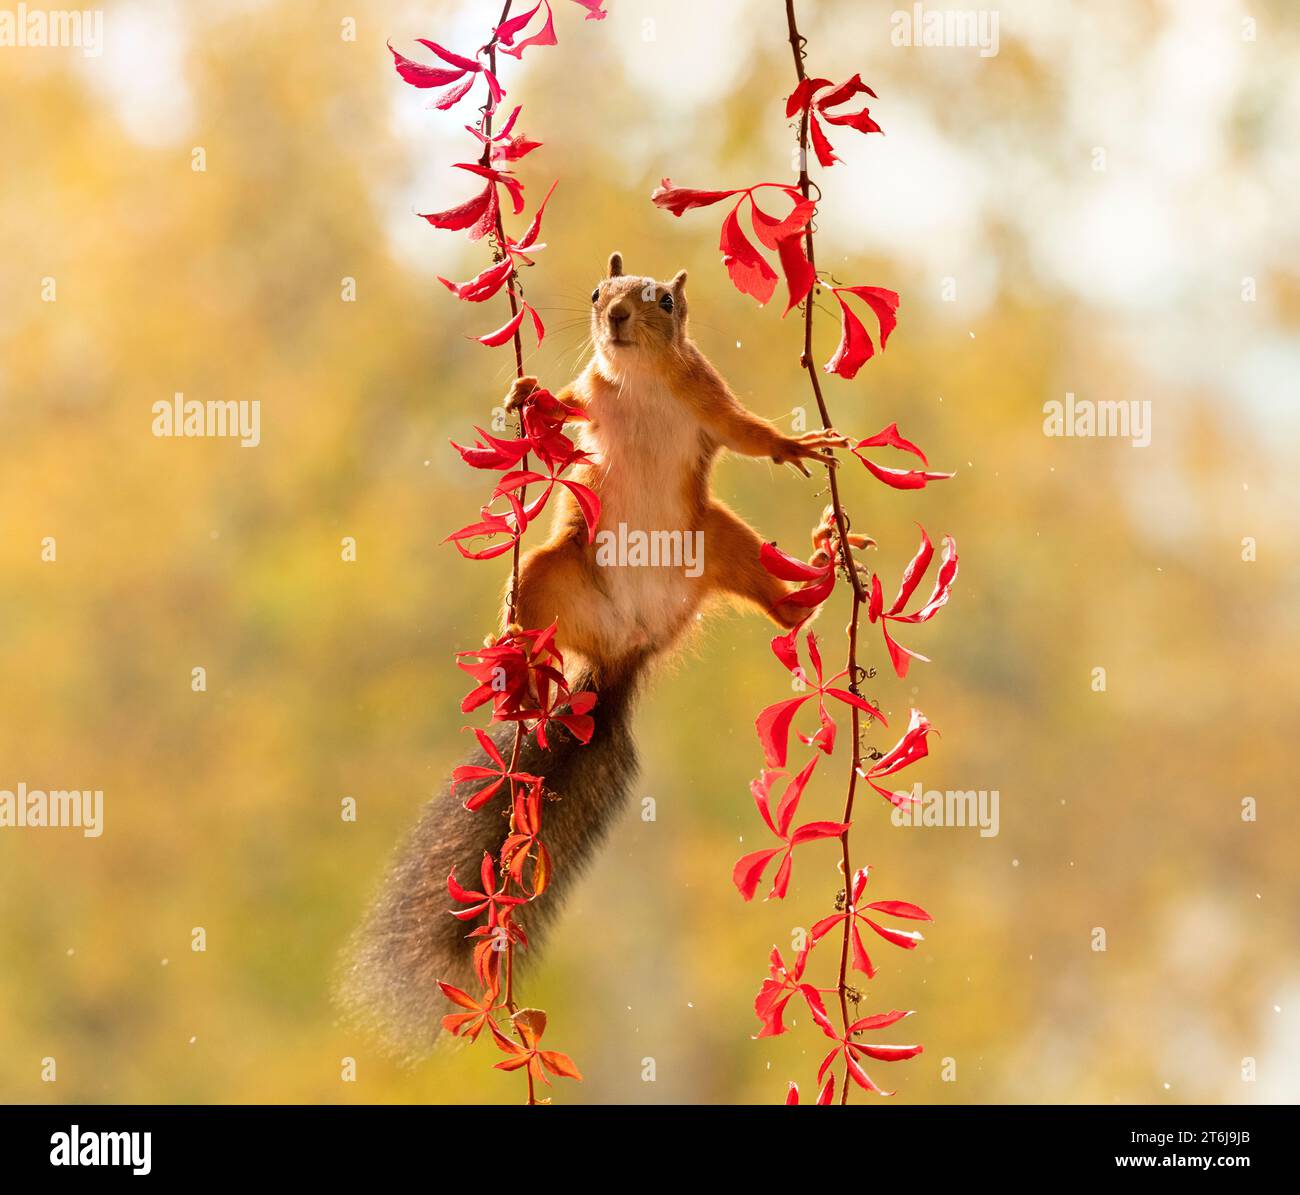 Red Squirrel on Virginia creeper branches Stock Photo